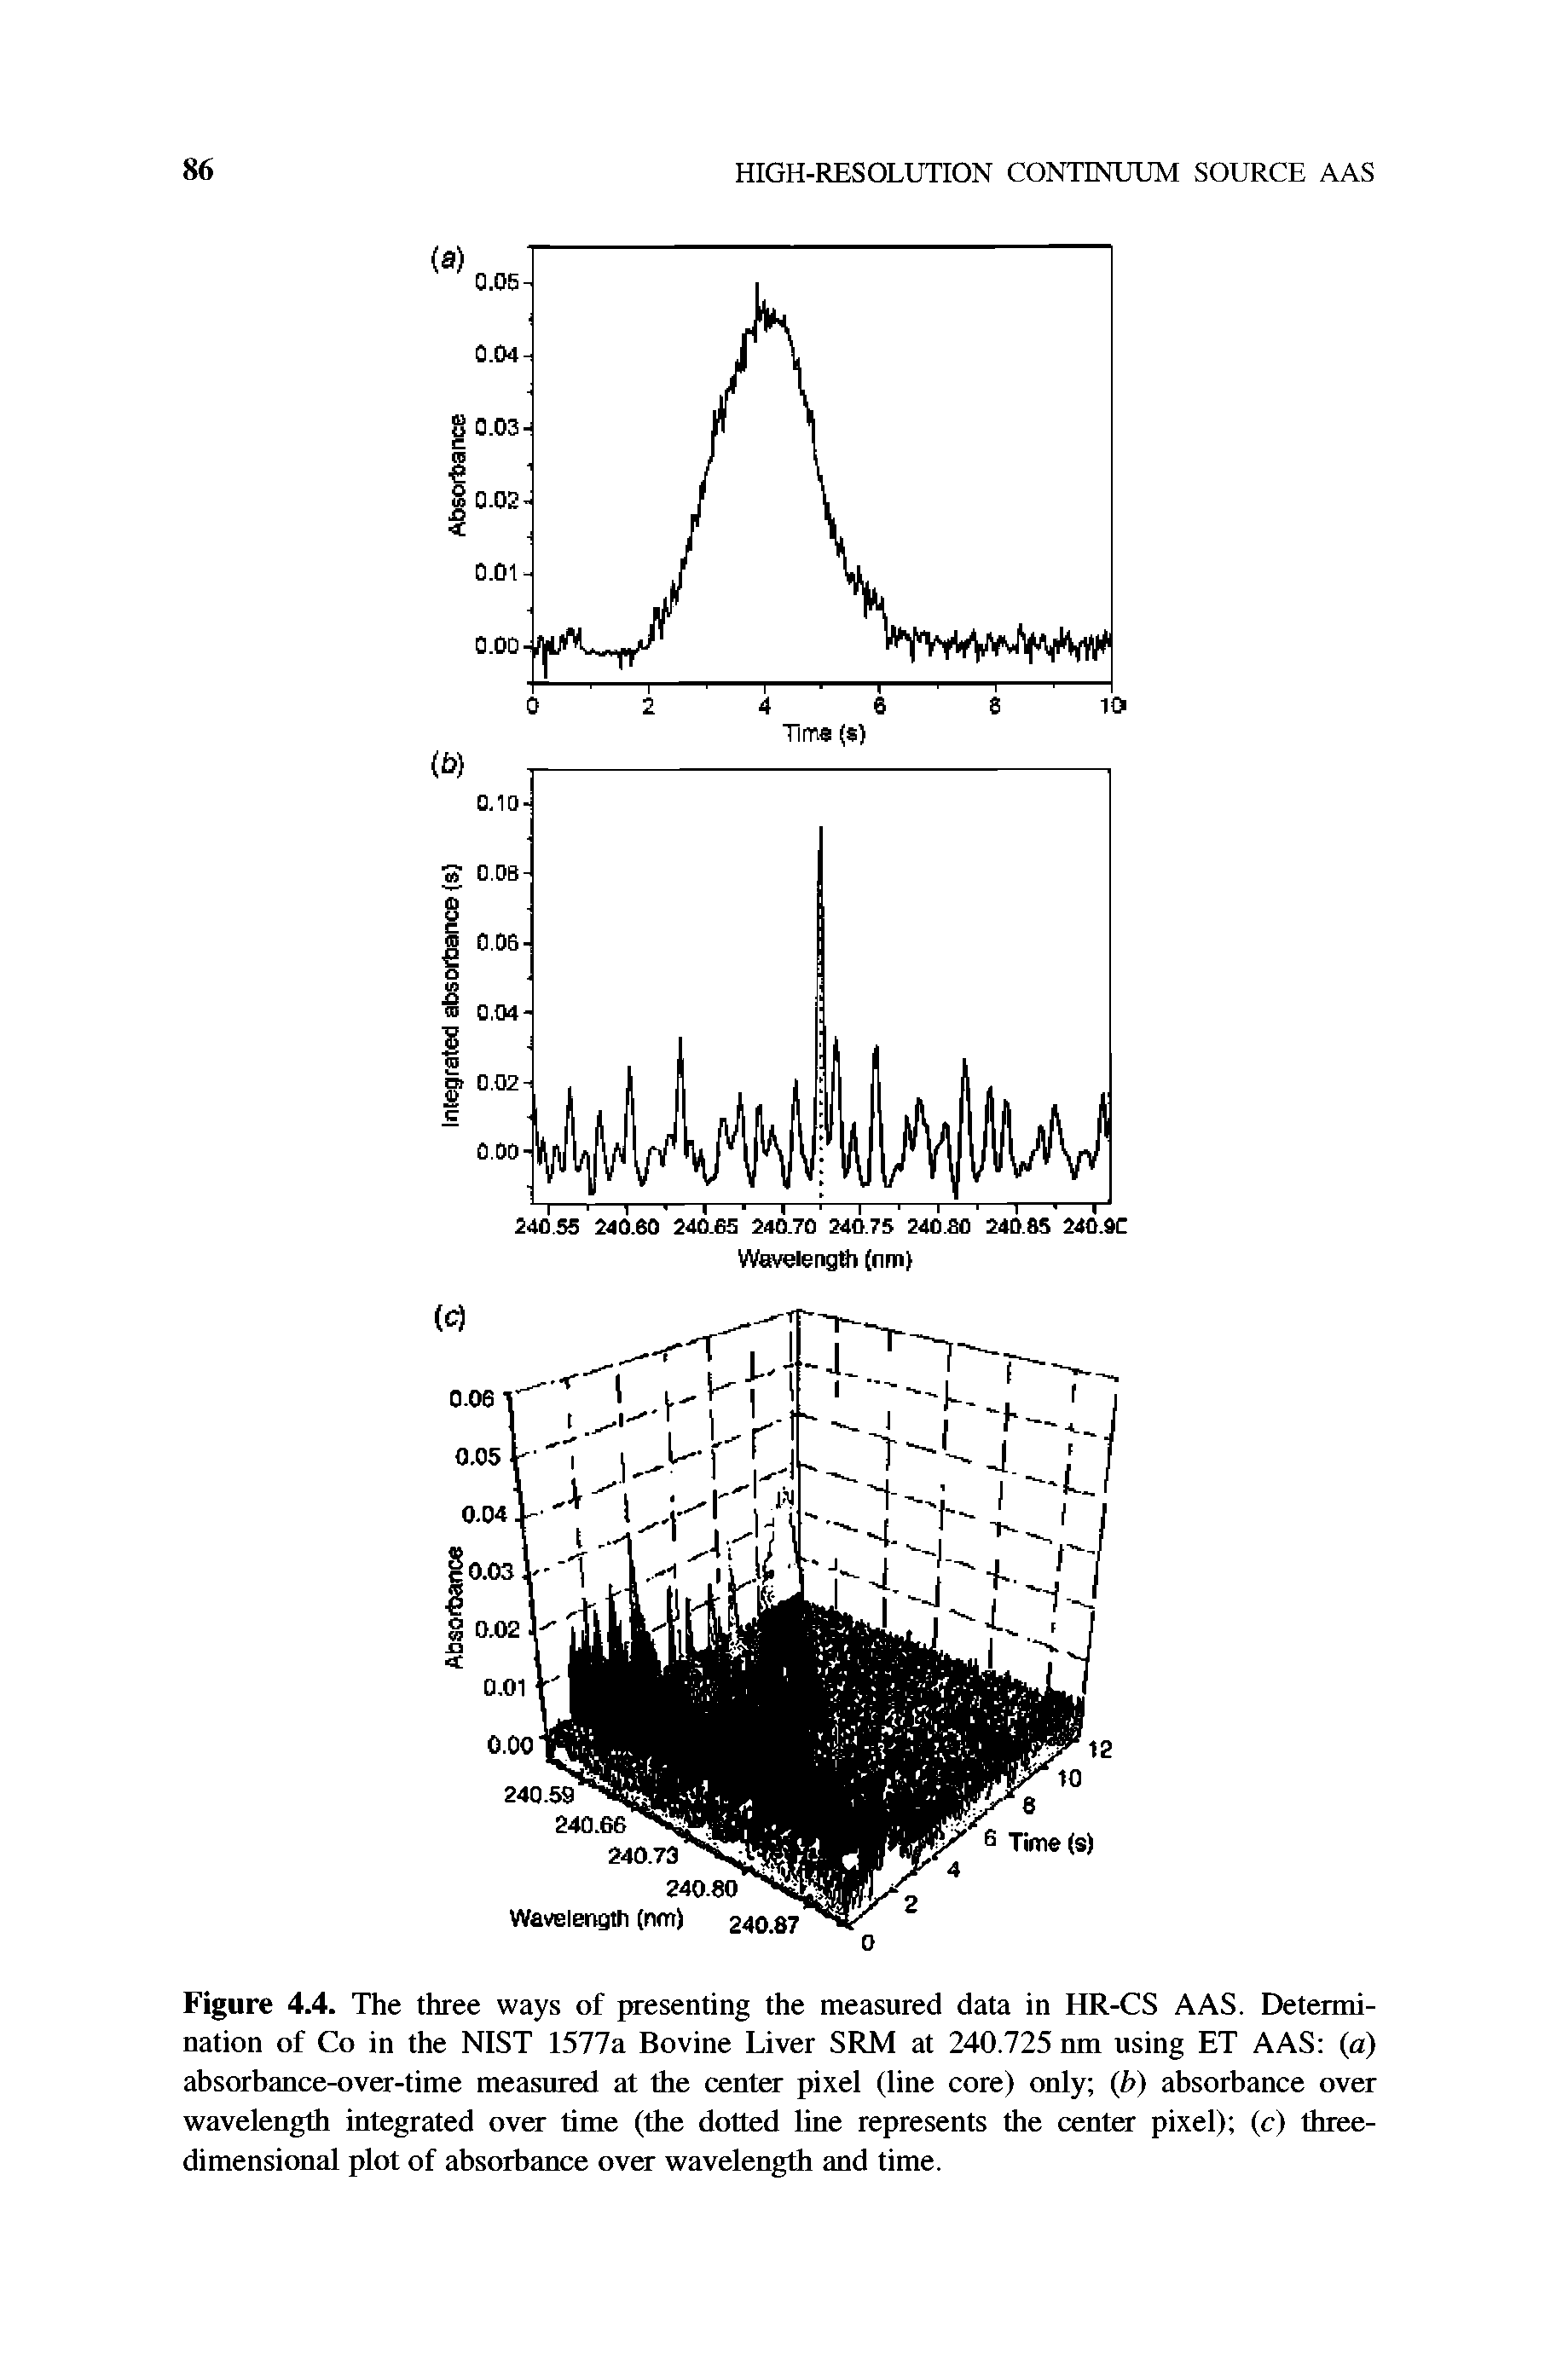 Figure 4.4. The three ways of presenting the measured data in HR-CS AAS. Determination of Co in the NIST 1577a Bovine Liver SRM at 240.725 nm using ET AAS a) absorbance-over-time measured at the center pixel (line core) only (b) absorbance over wavelength integrated over time (the dotted line represents the center pixel) (c) three-dimensional plot of absorbance over wavelength and time.